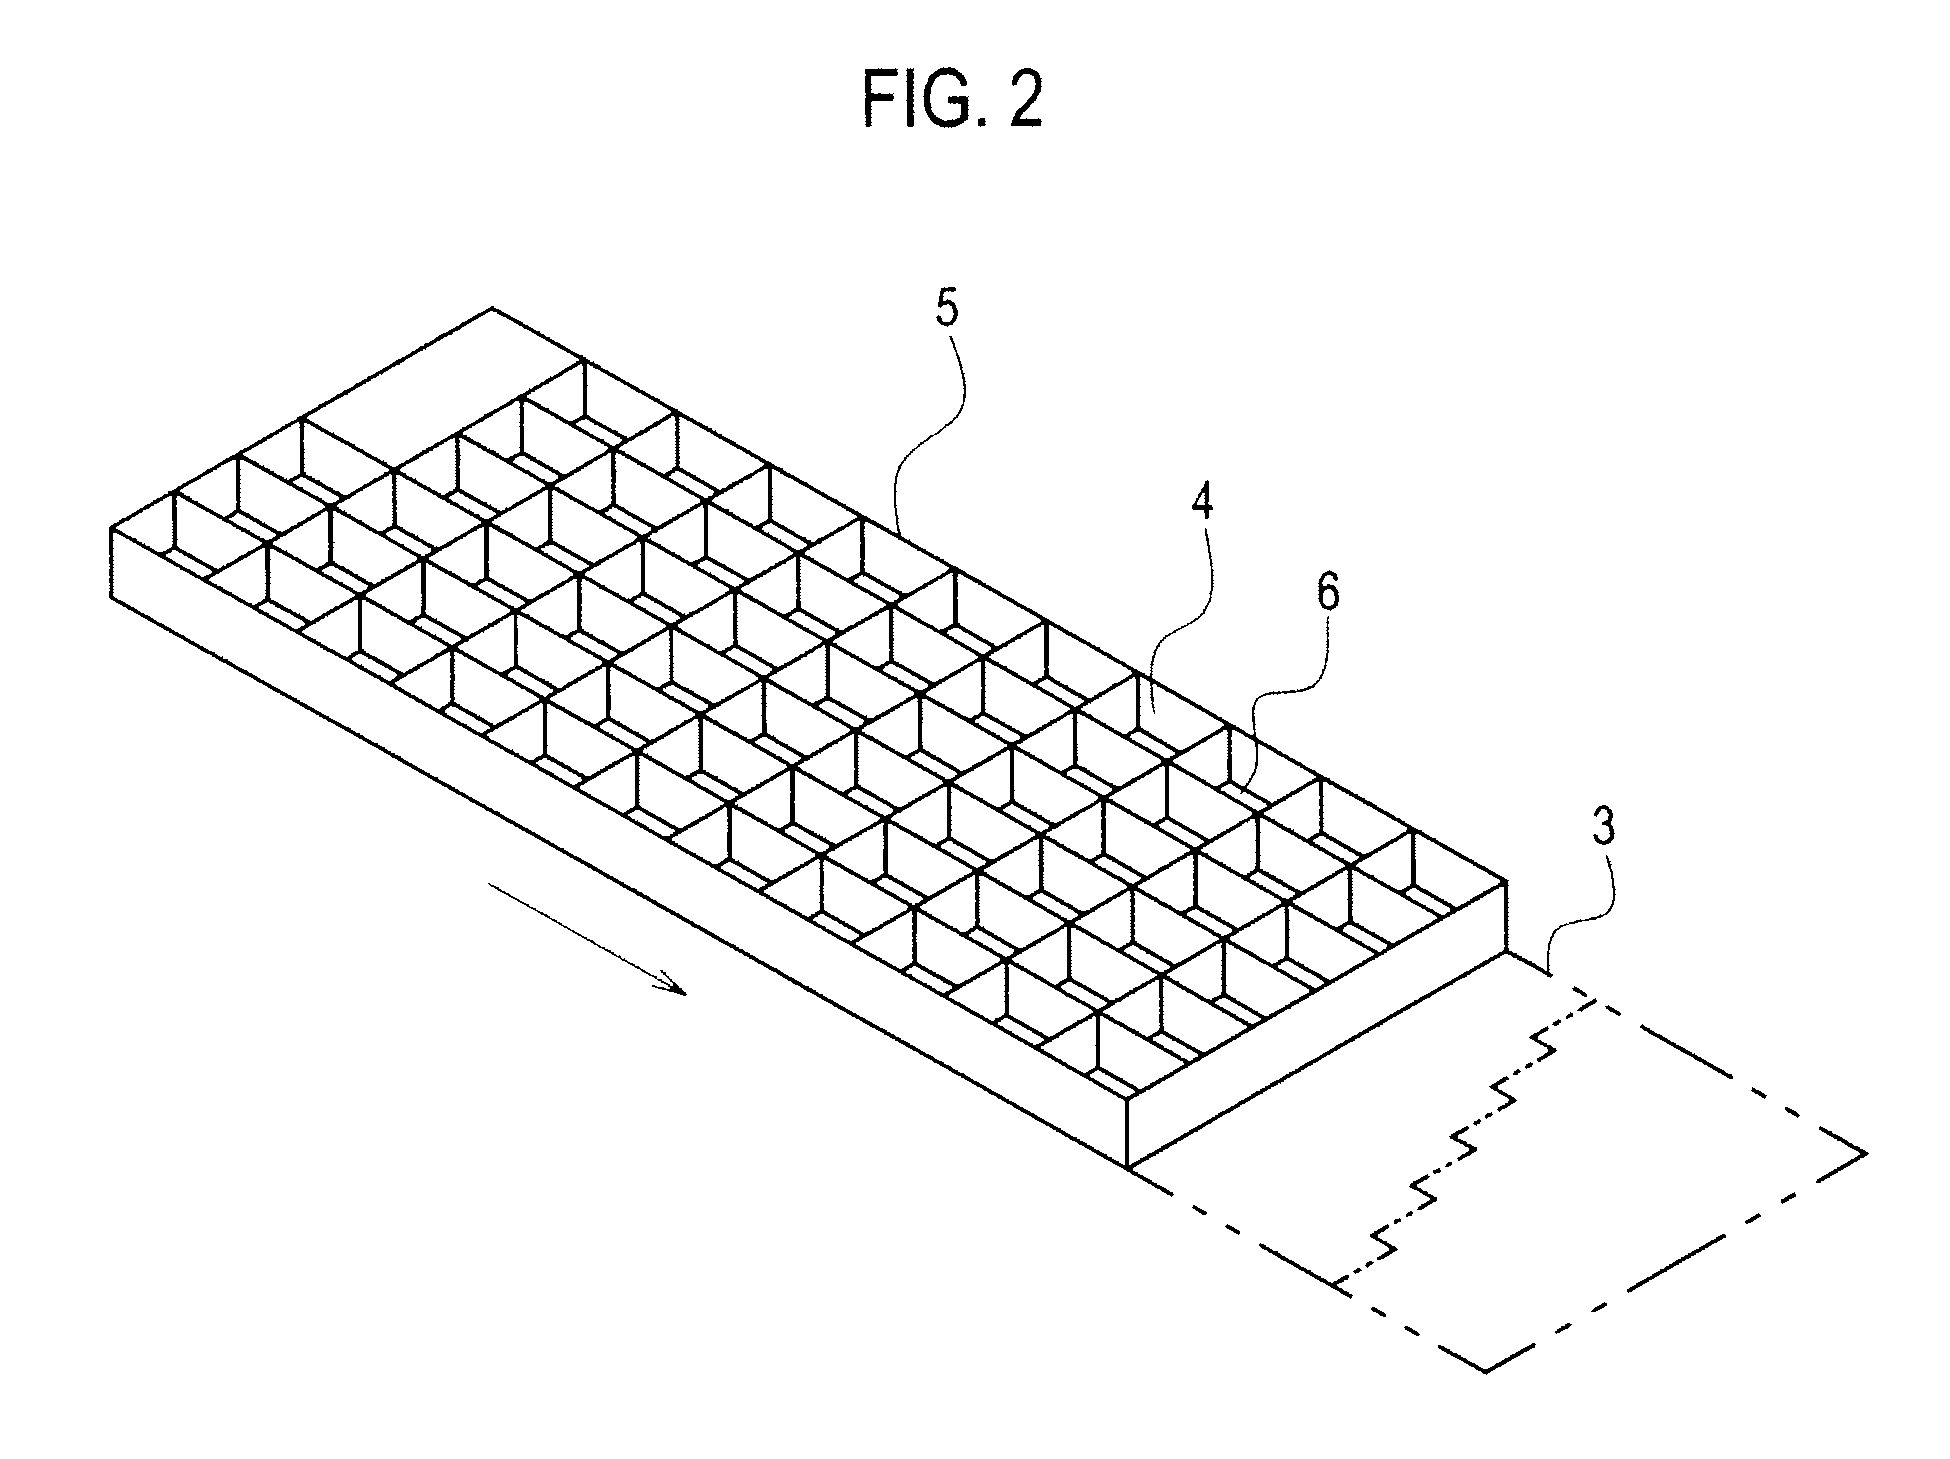 Distributed medicine supplying device and medicine packaging device